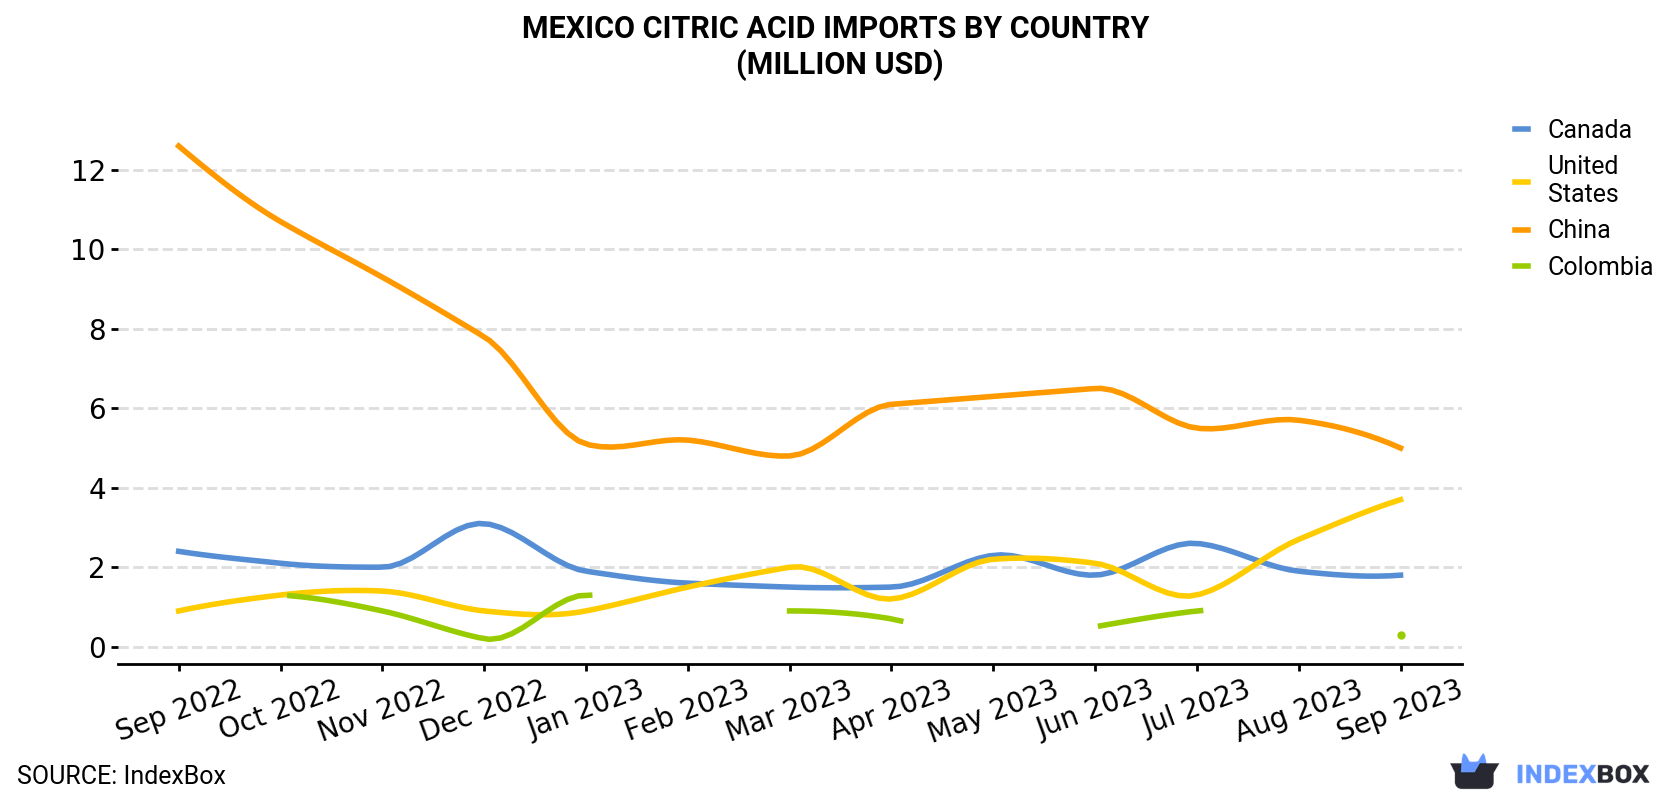 Mexico Citric Acid Imports By Country (Million USD)